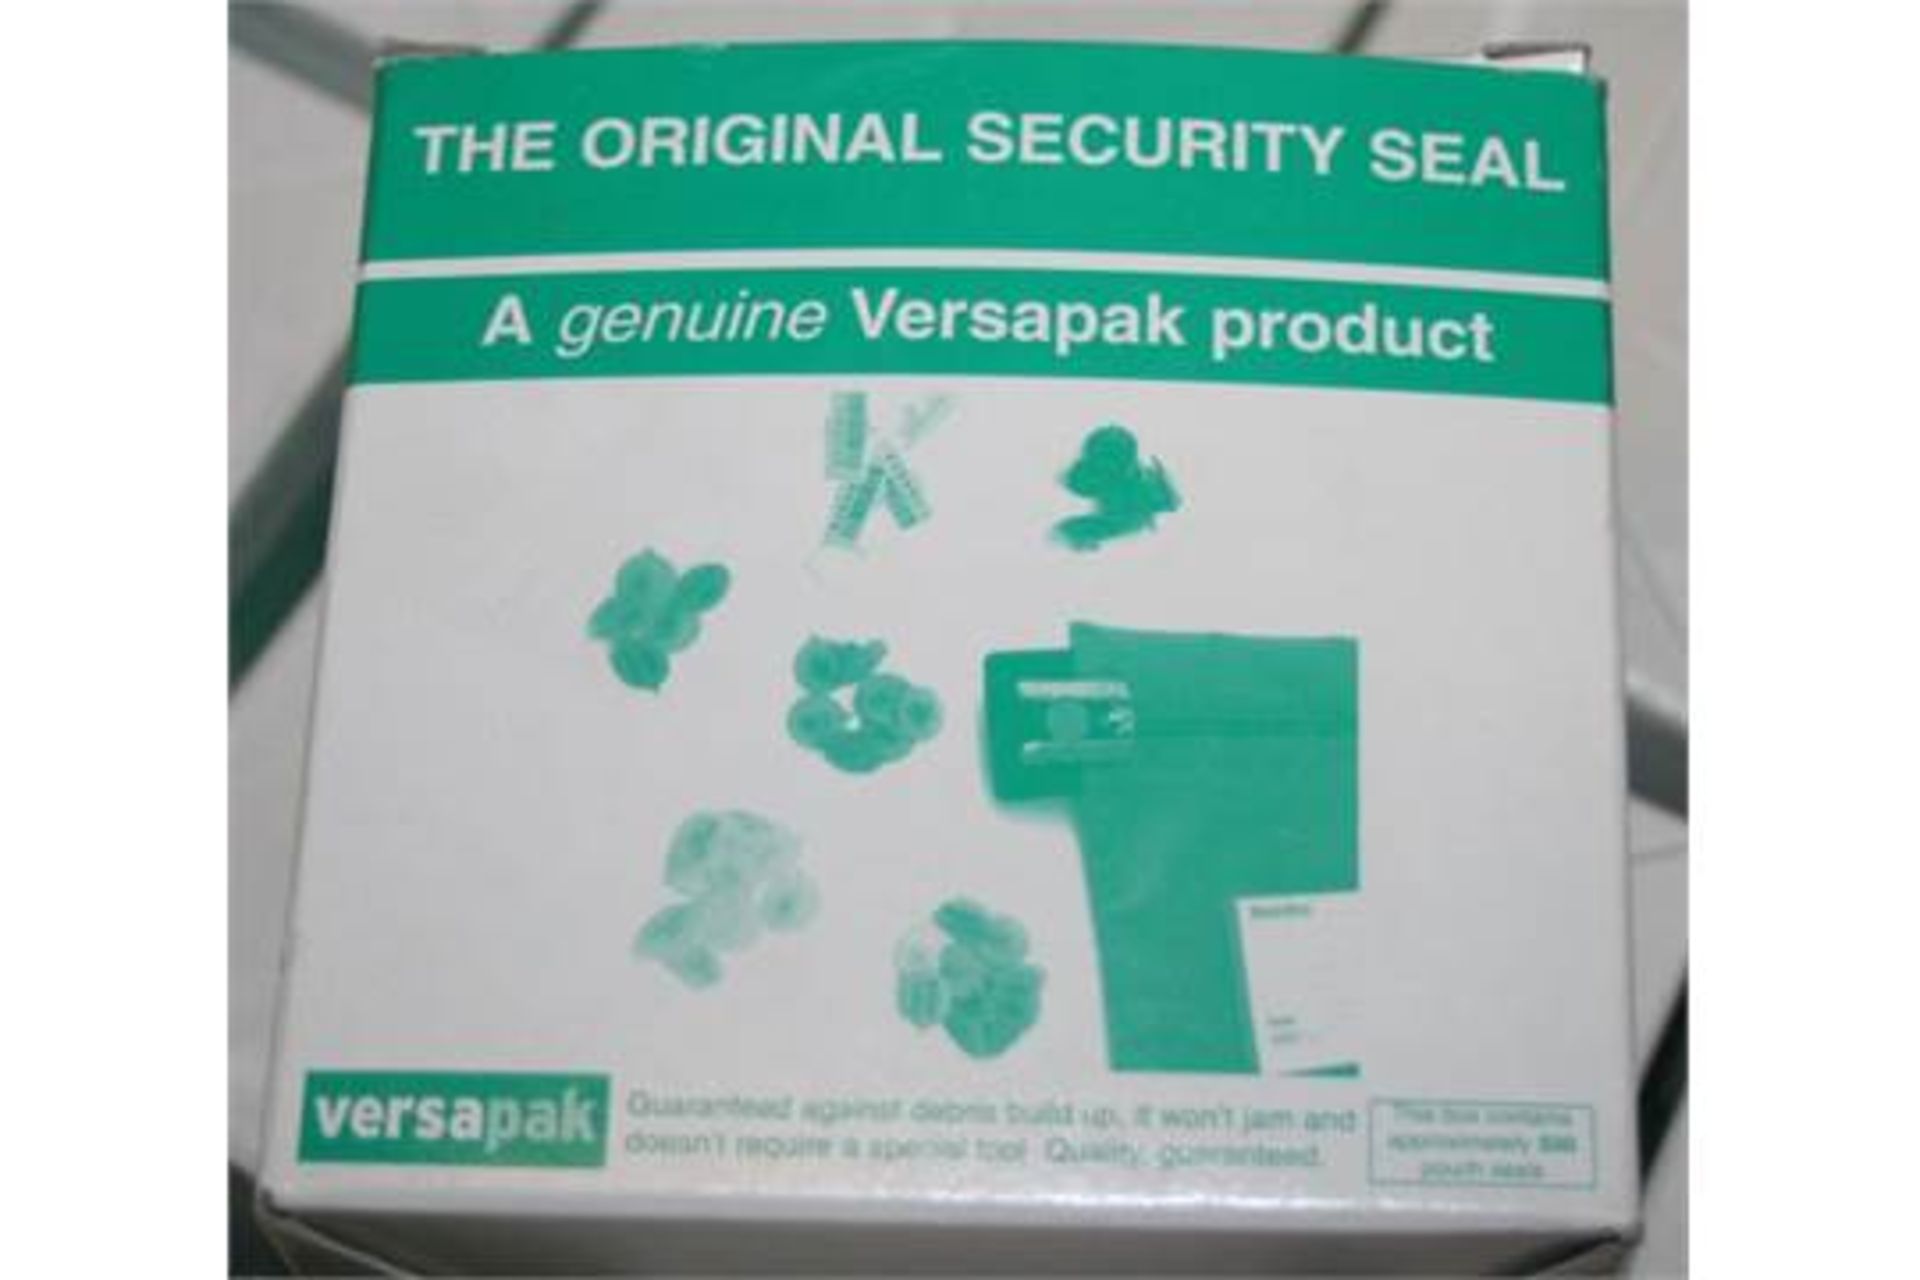 5,000 x Versapak Security Seals - As Used Throughout The Postal System and Welcomed by Leading - Image 2 of 3